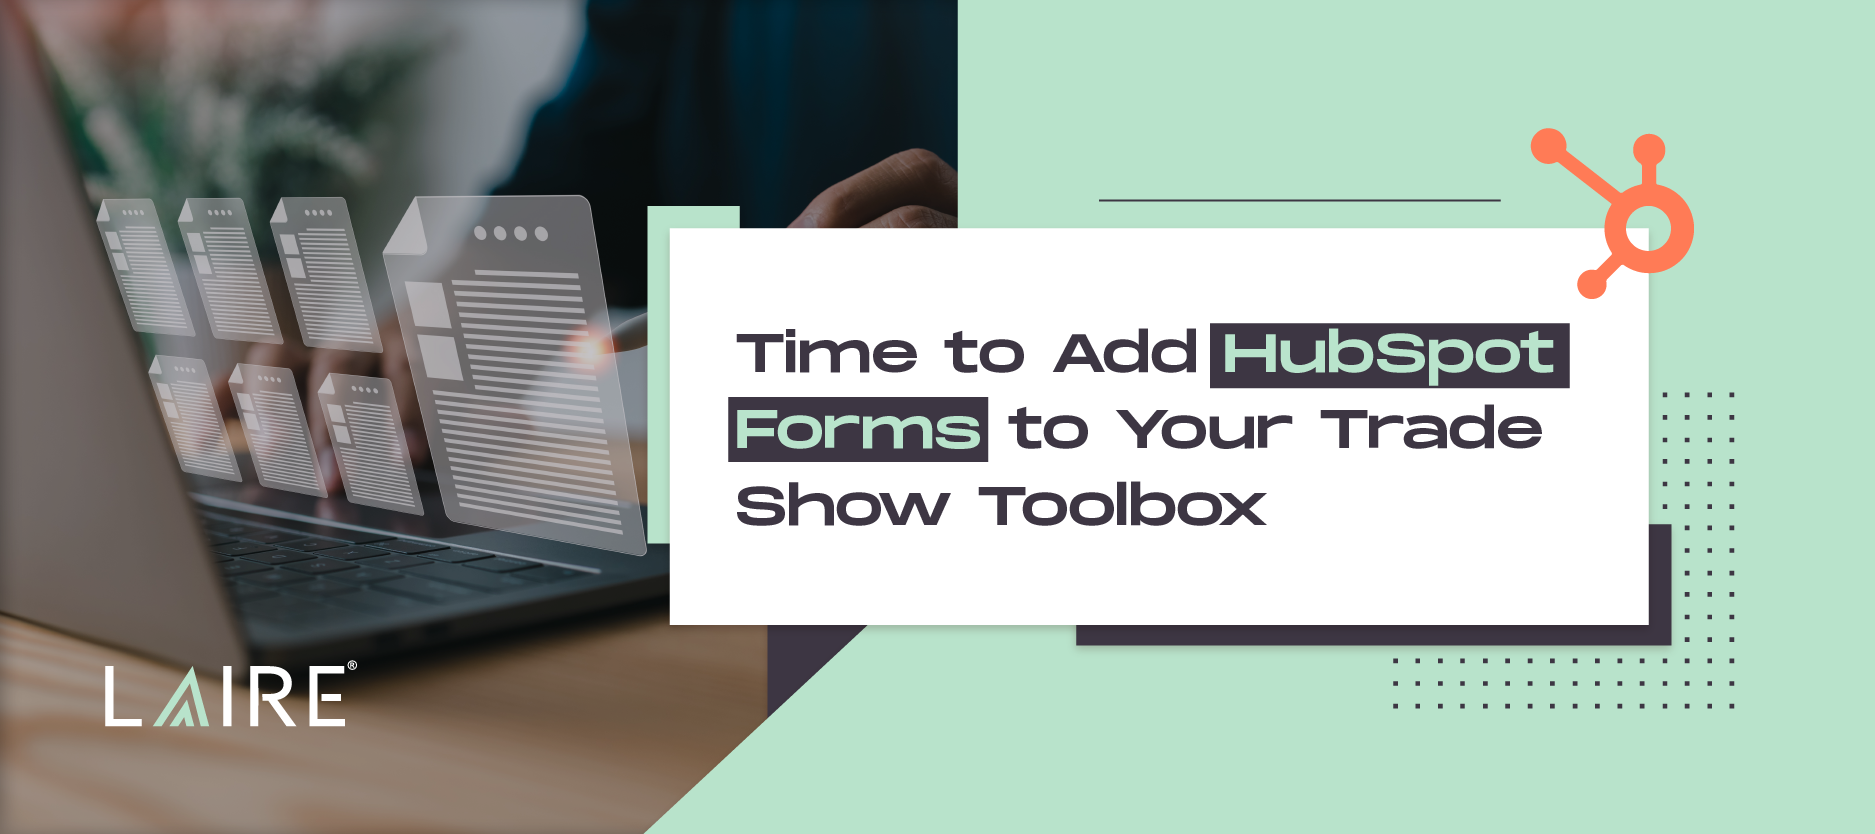 Time to add hubspot forms to your trade show toolbox